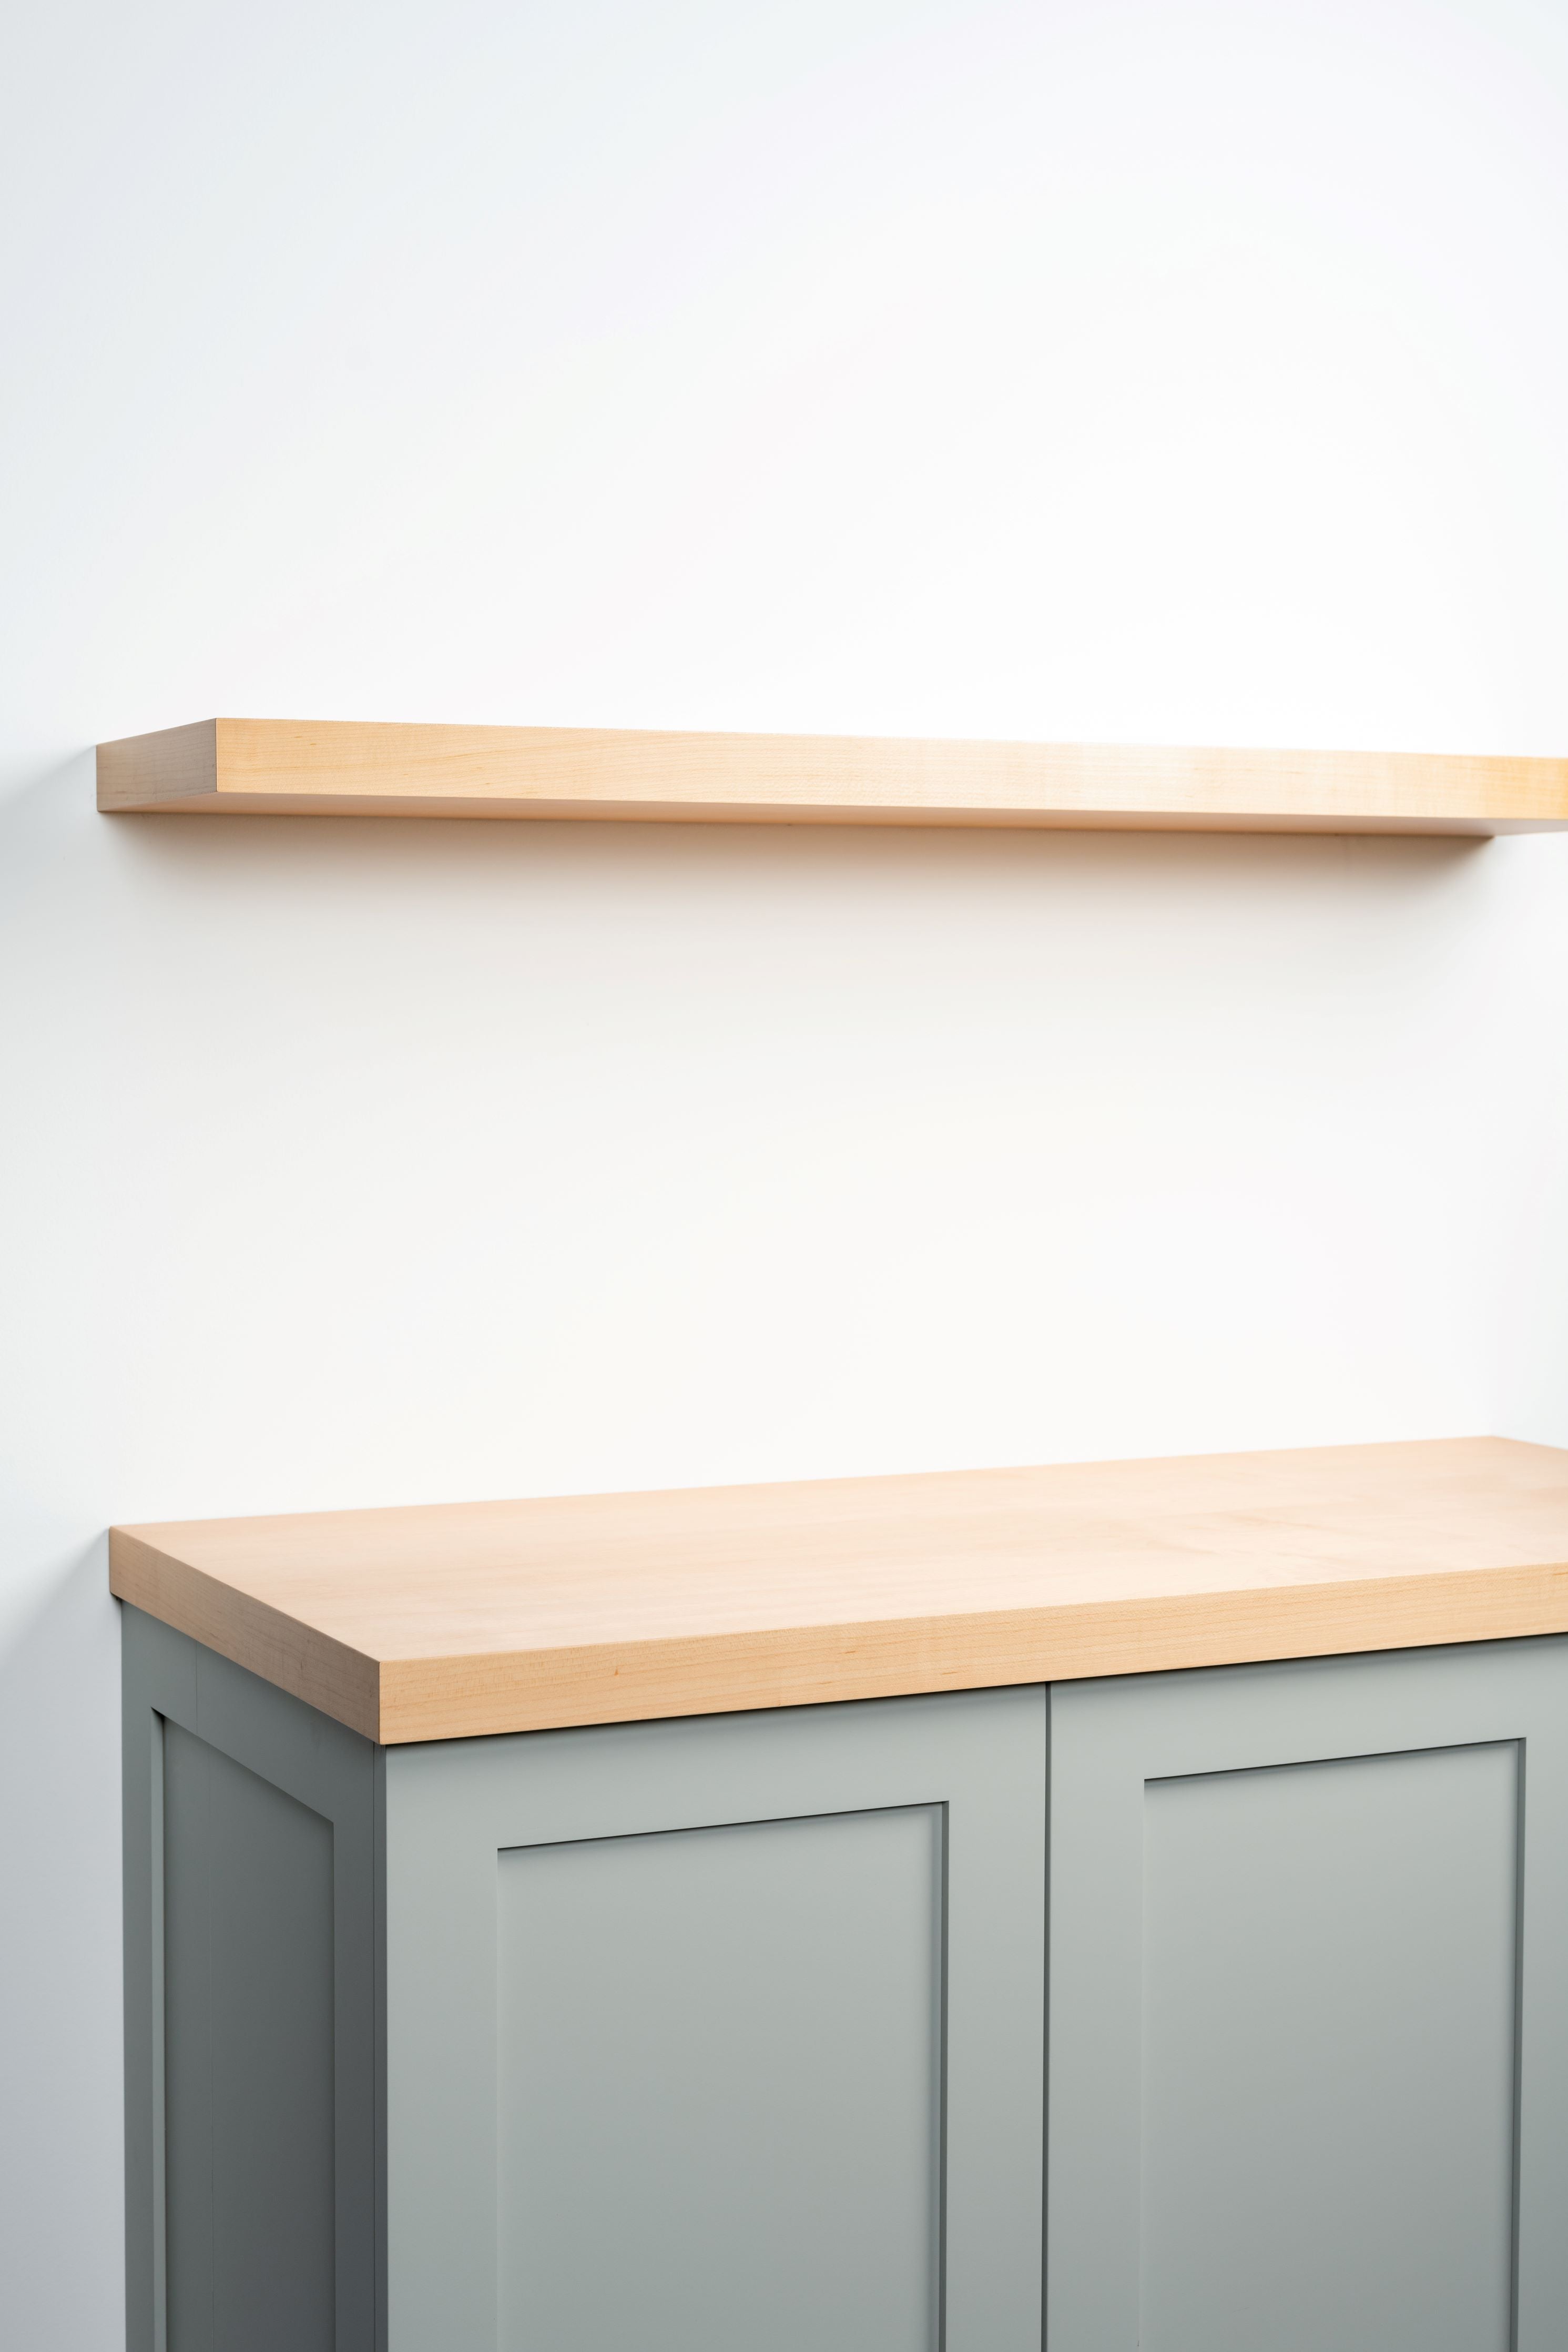 Maple 4.1-6" thick Cabinet Top / Slab Shelf